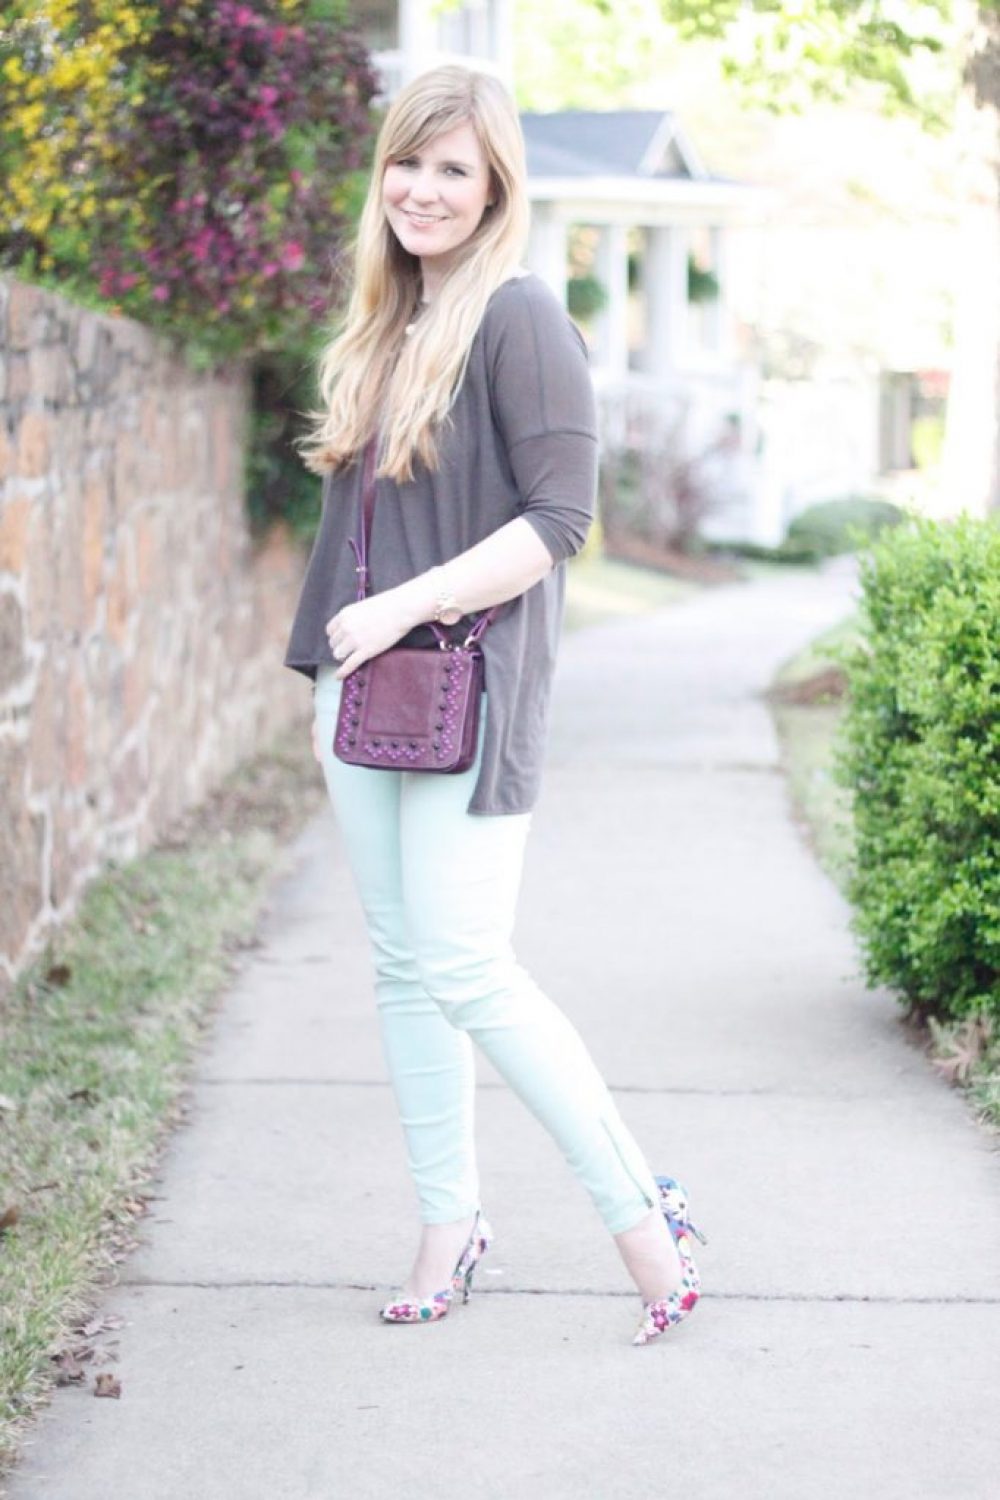 How I Wore My Heels: With Ankle Zippers (Giveaway!)